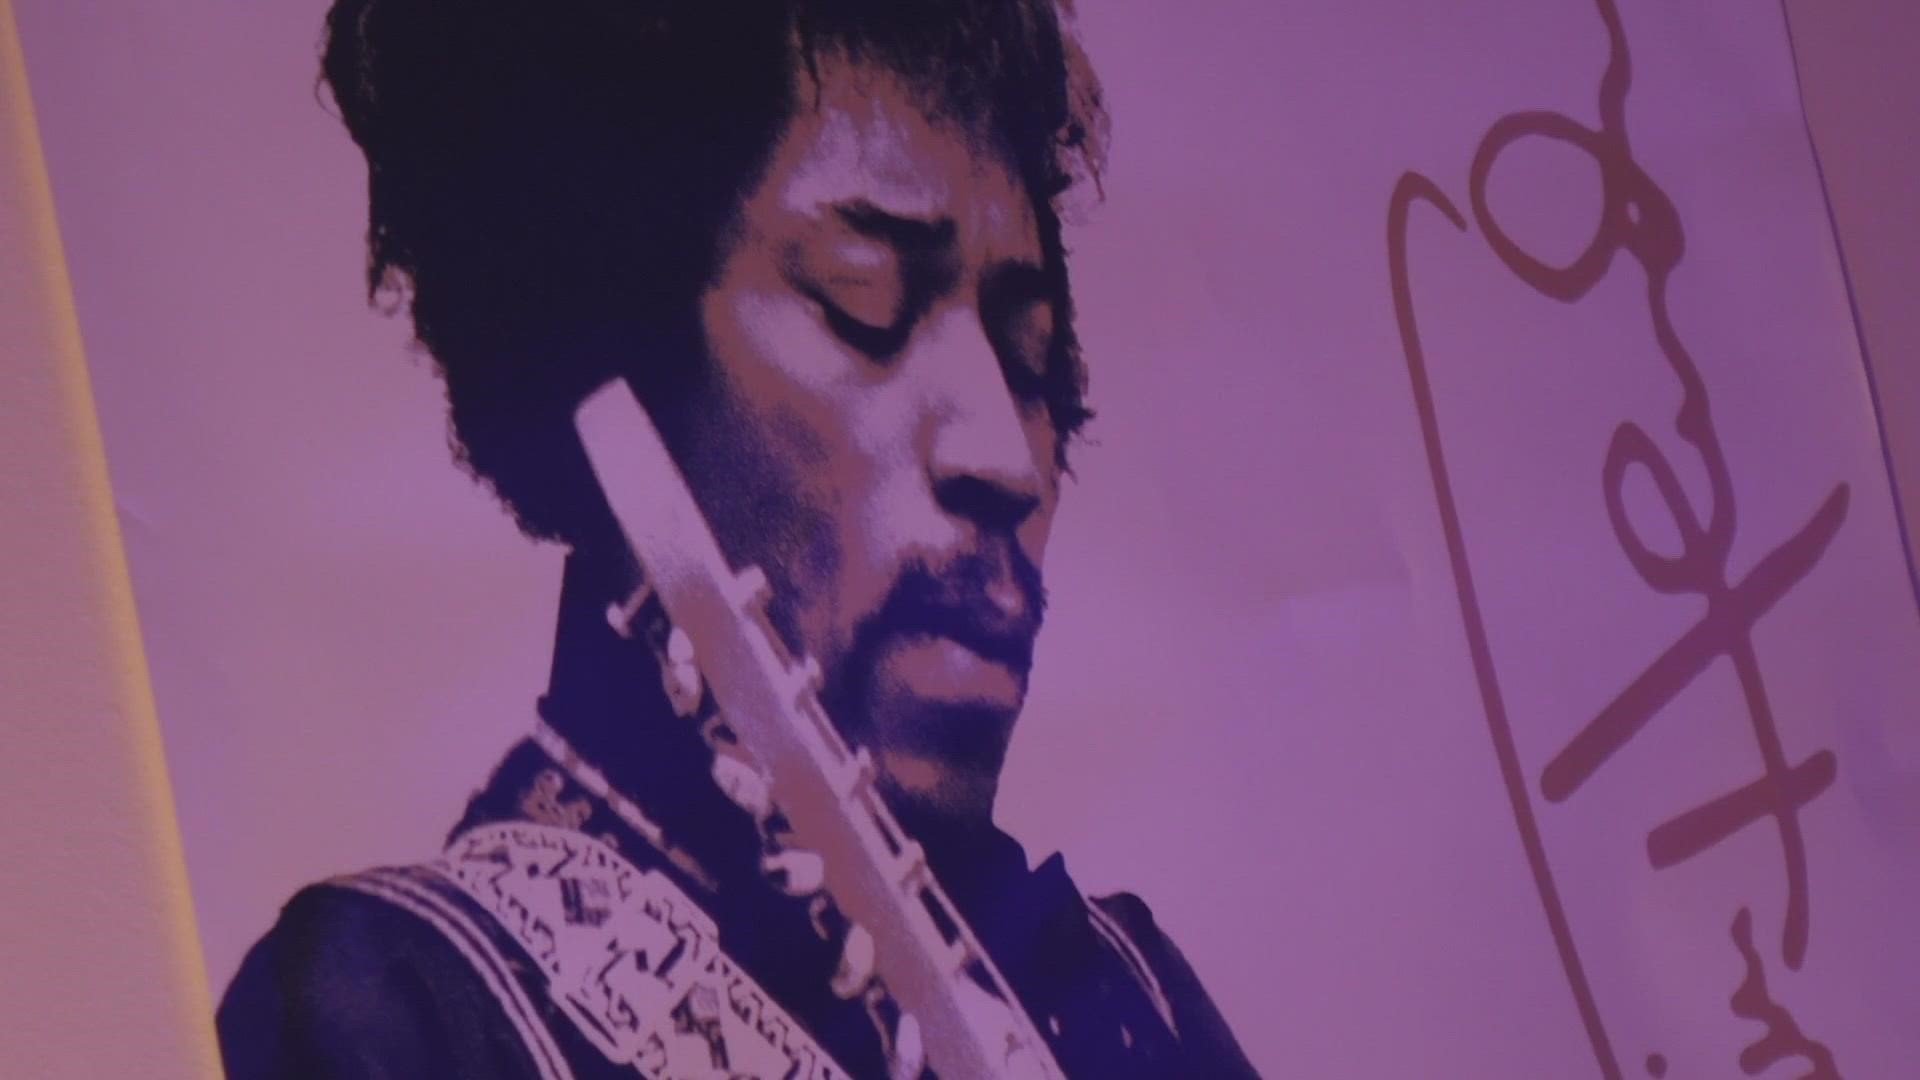 The event line-up includes a documentary screening, a Q&A with Hendrix's sister and a special pop-up shop with Hendrix-themed gifts.